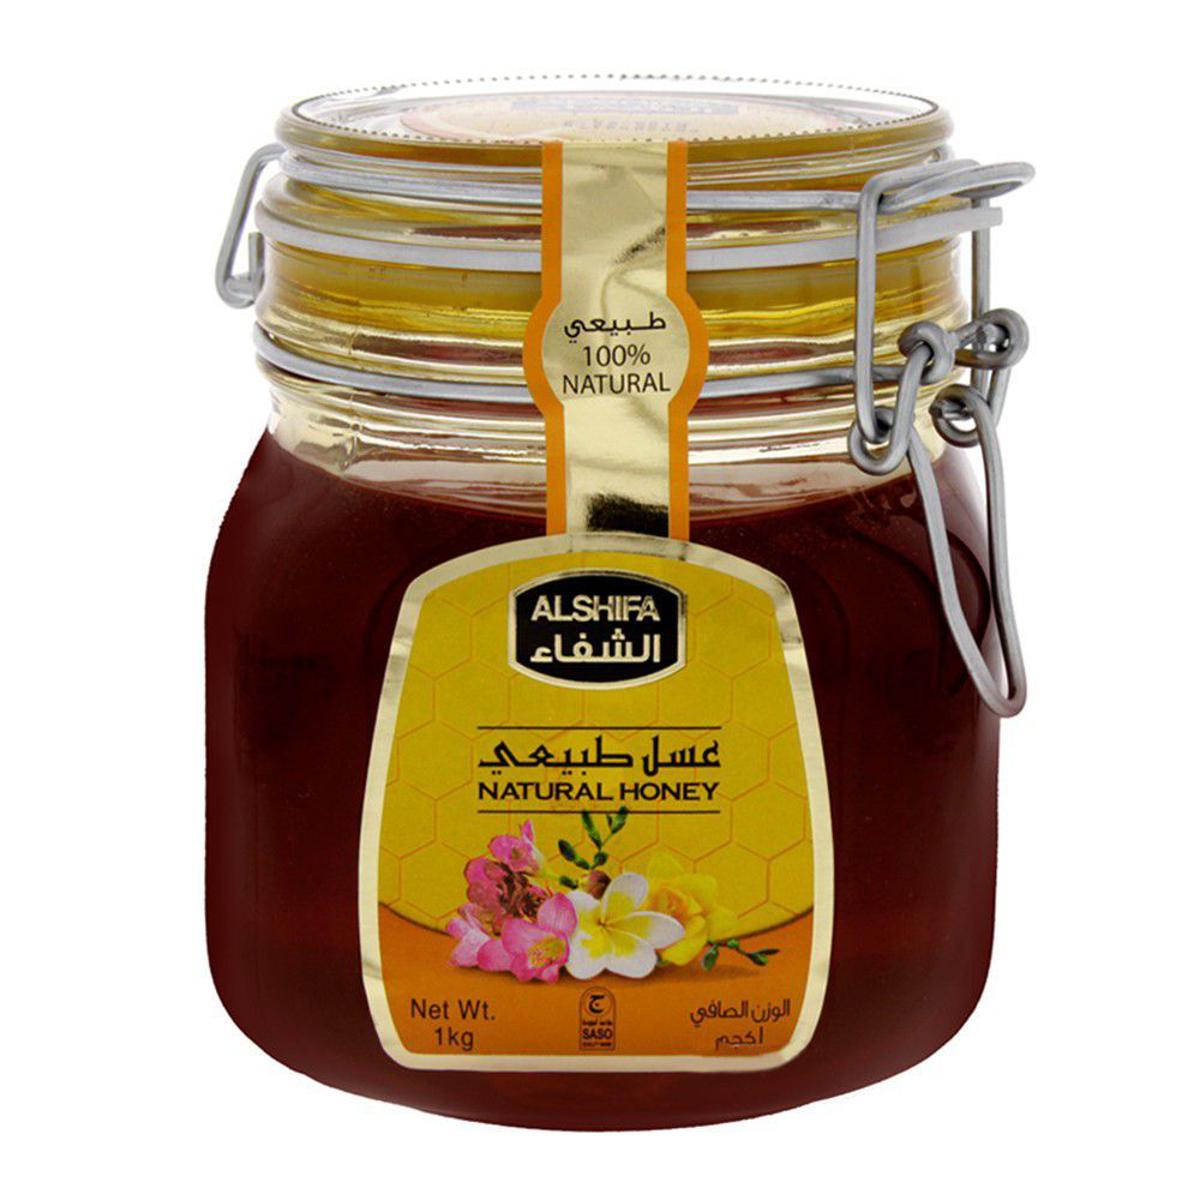 Looking for the best and pure honey in Lahore, Pakistan? Look no further – we’ve got you covered!